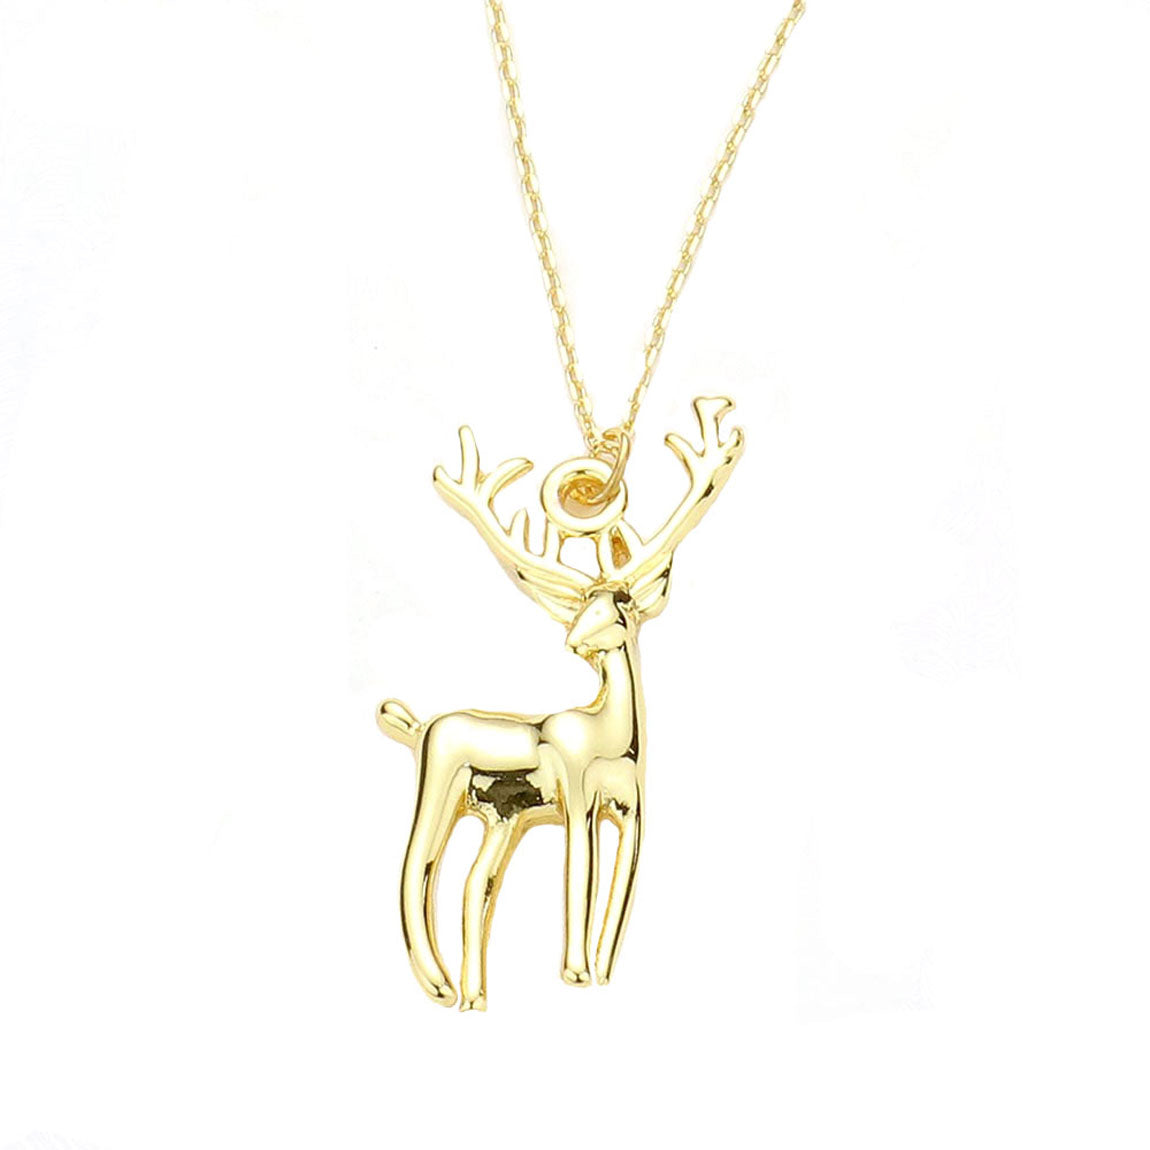 Gold Dipped Reindeer Pendant Necklace. Beautifully crafted design adds a gorgeous glow to any outfit. Jewelry that fits your lifestyle! Perfect Birthday Gift, Anniversary Gift, Mother's Day Gift, Anniversary Gift, Graduation Gift, Prom Jewelry, Just Because Gift, Thank you Gift.